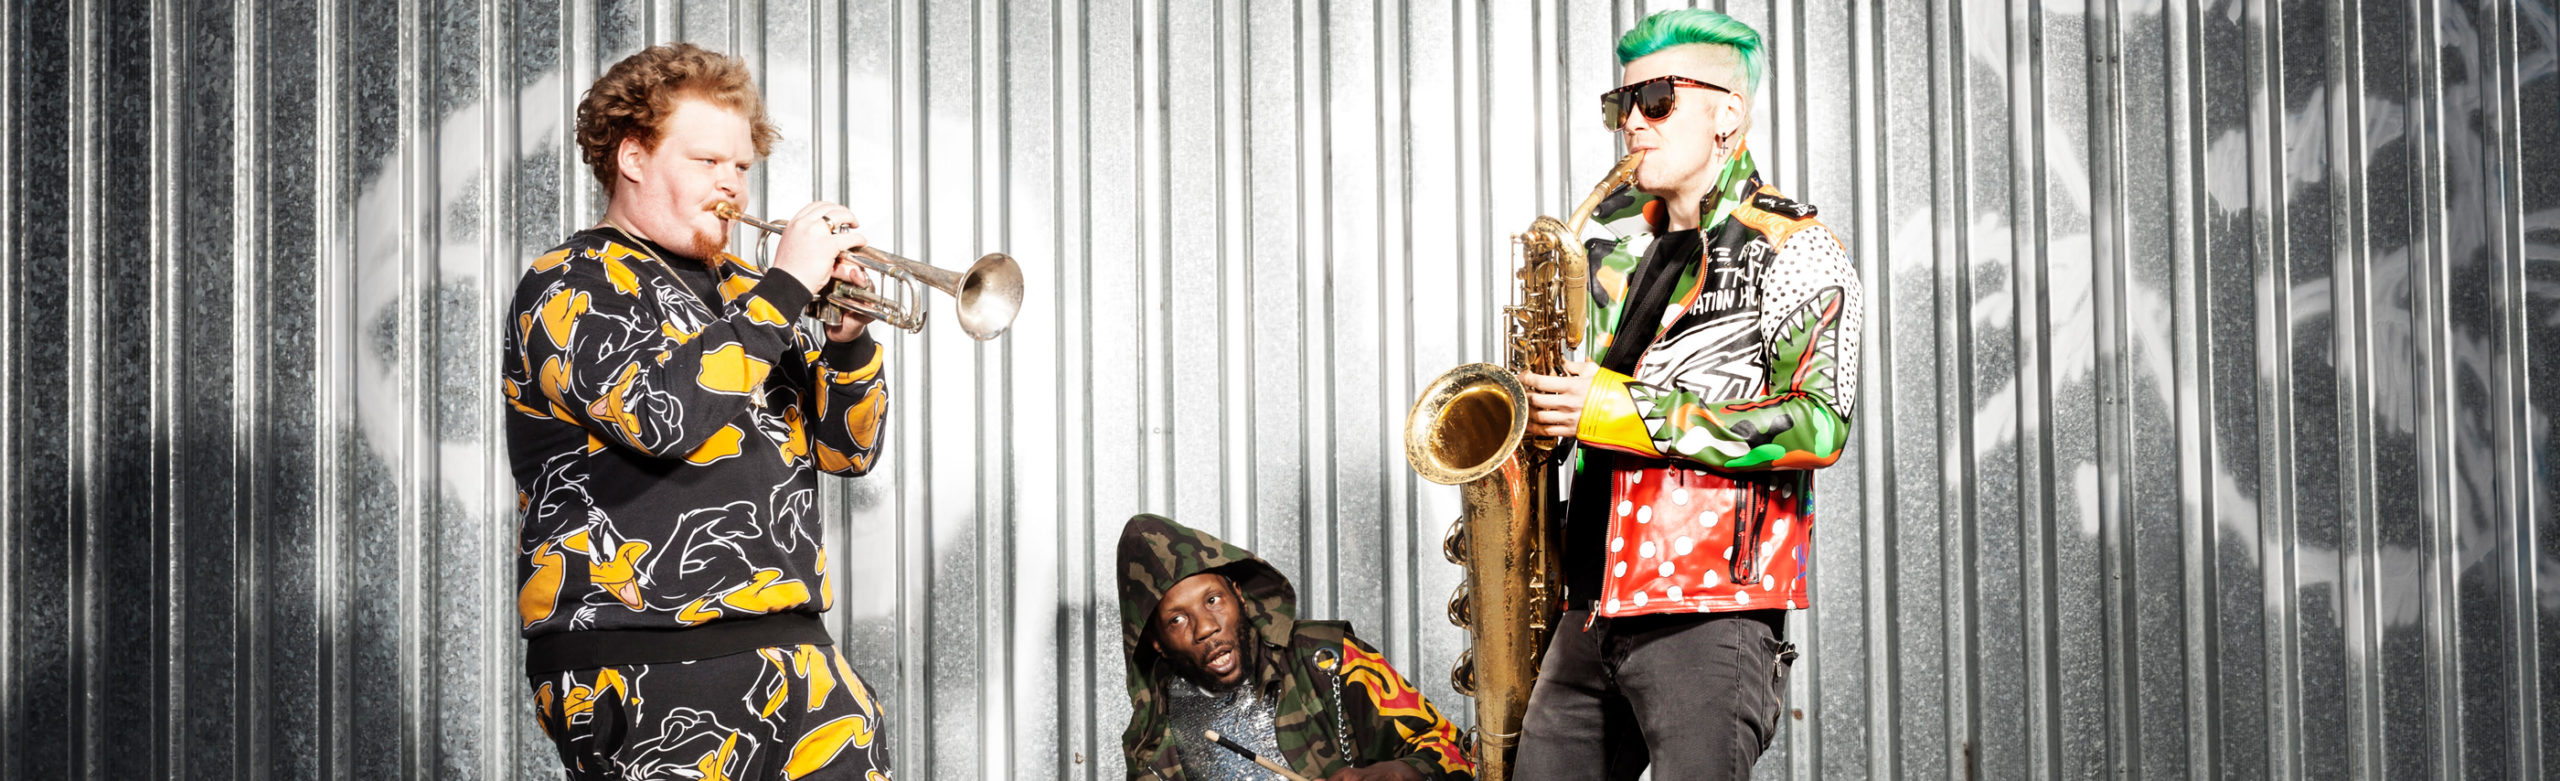 Event Info: Too Many Zooz at the Top Hat 2019 Image